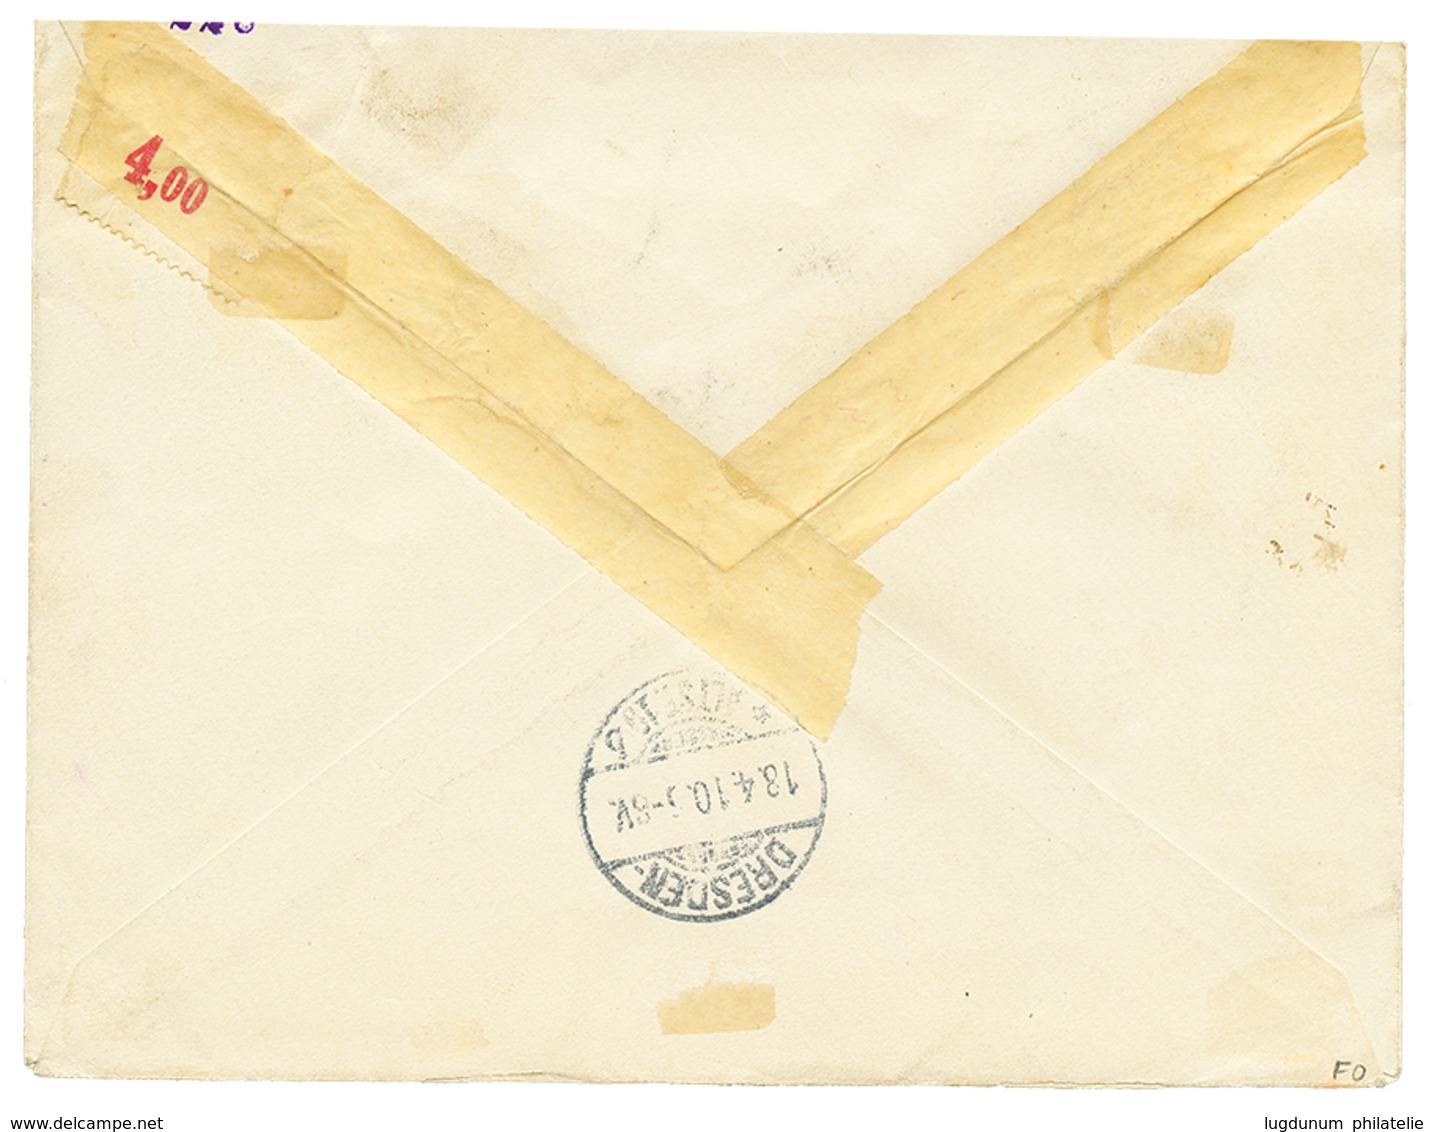 1079 1910 80pf Canc. KARIBIB On REGISTERED Envelope To GERMANY. Vf. - Sud-Ouest Africain Allemand